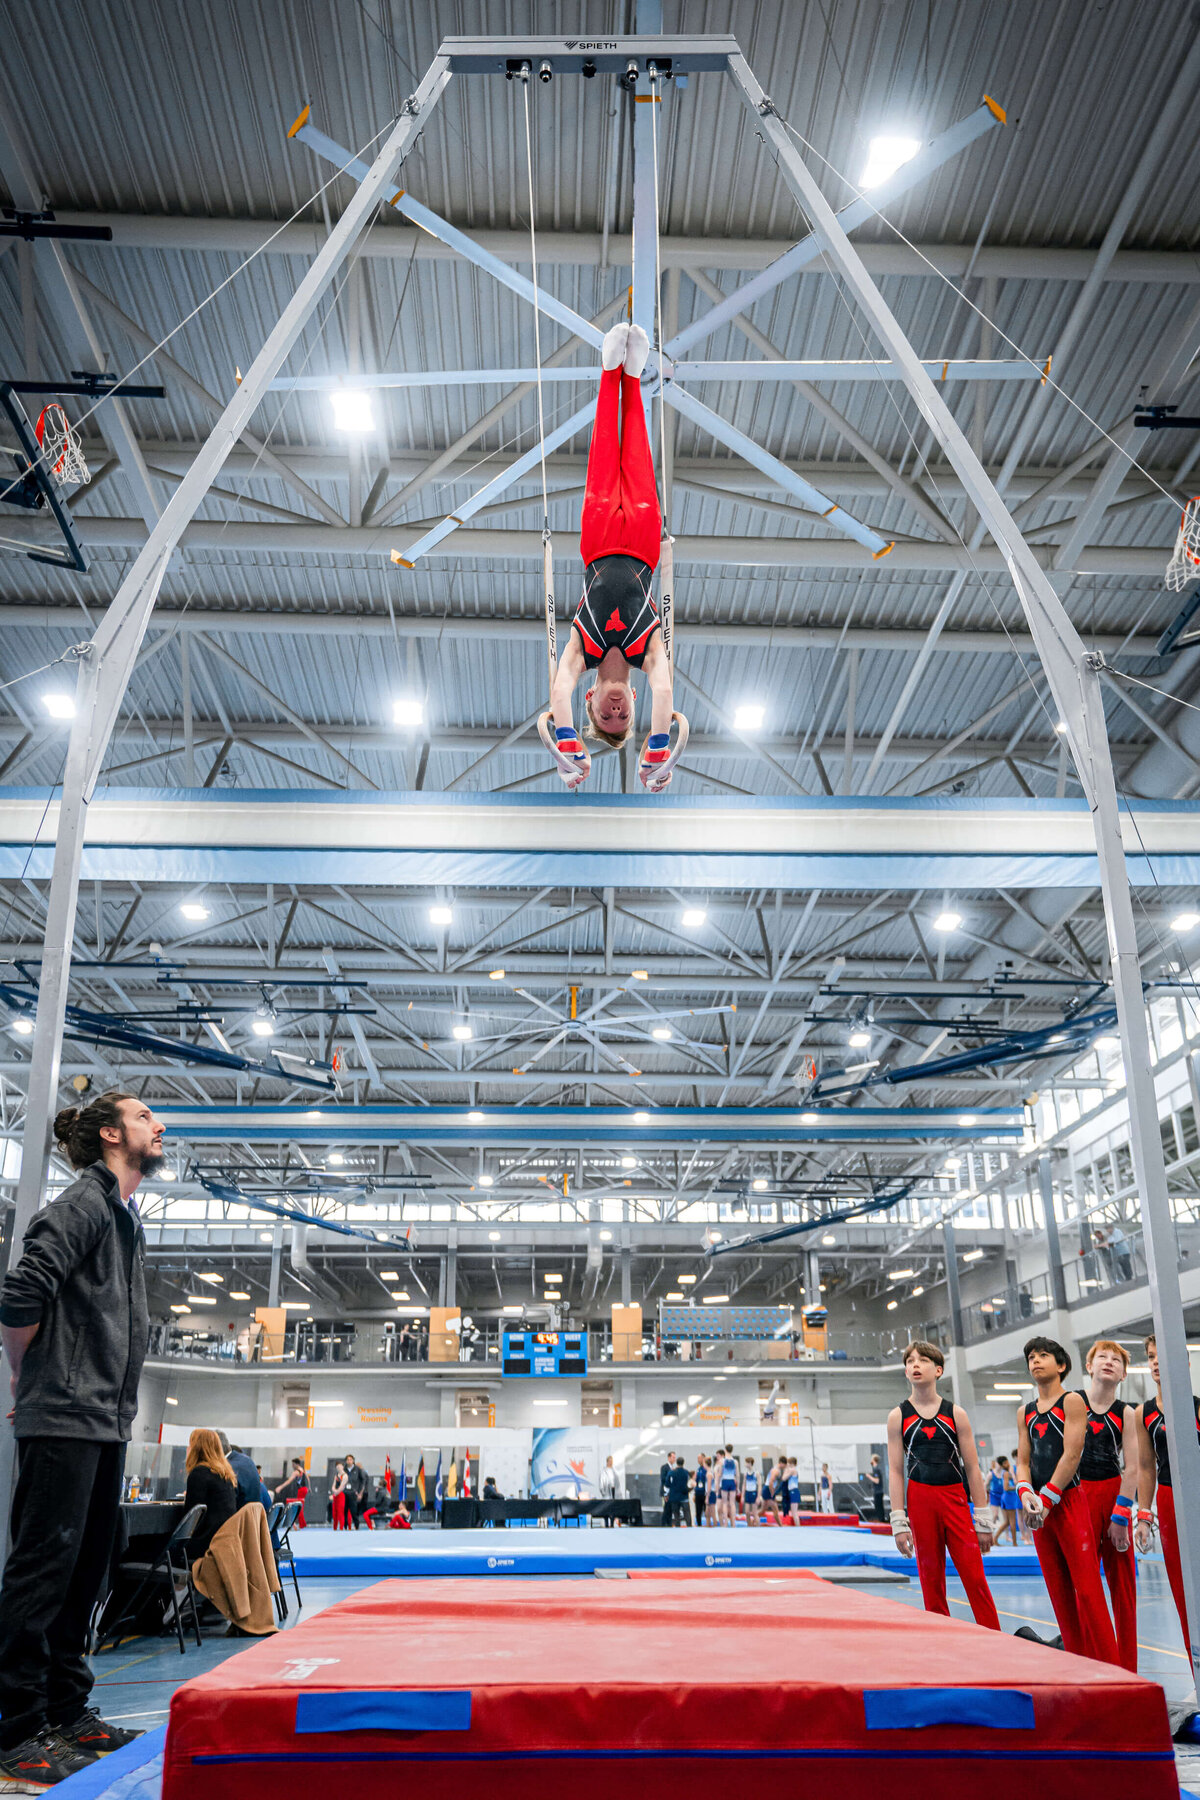 Photo by Luke O'Geil taken at the 2023 inaugural Grizzly Classic men's artistic gymnastics competitionA9_00118